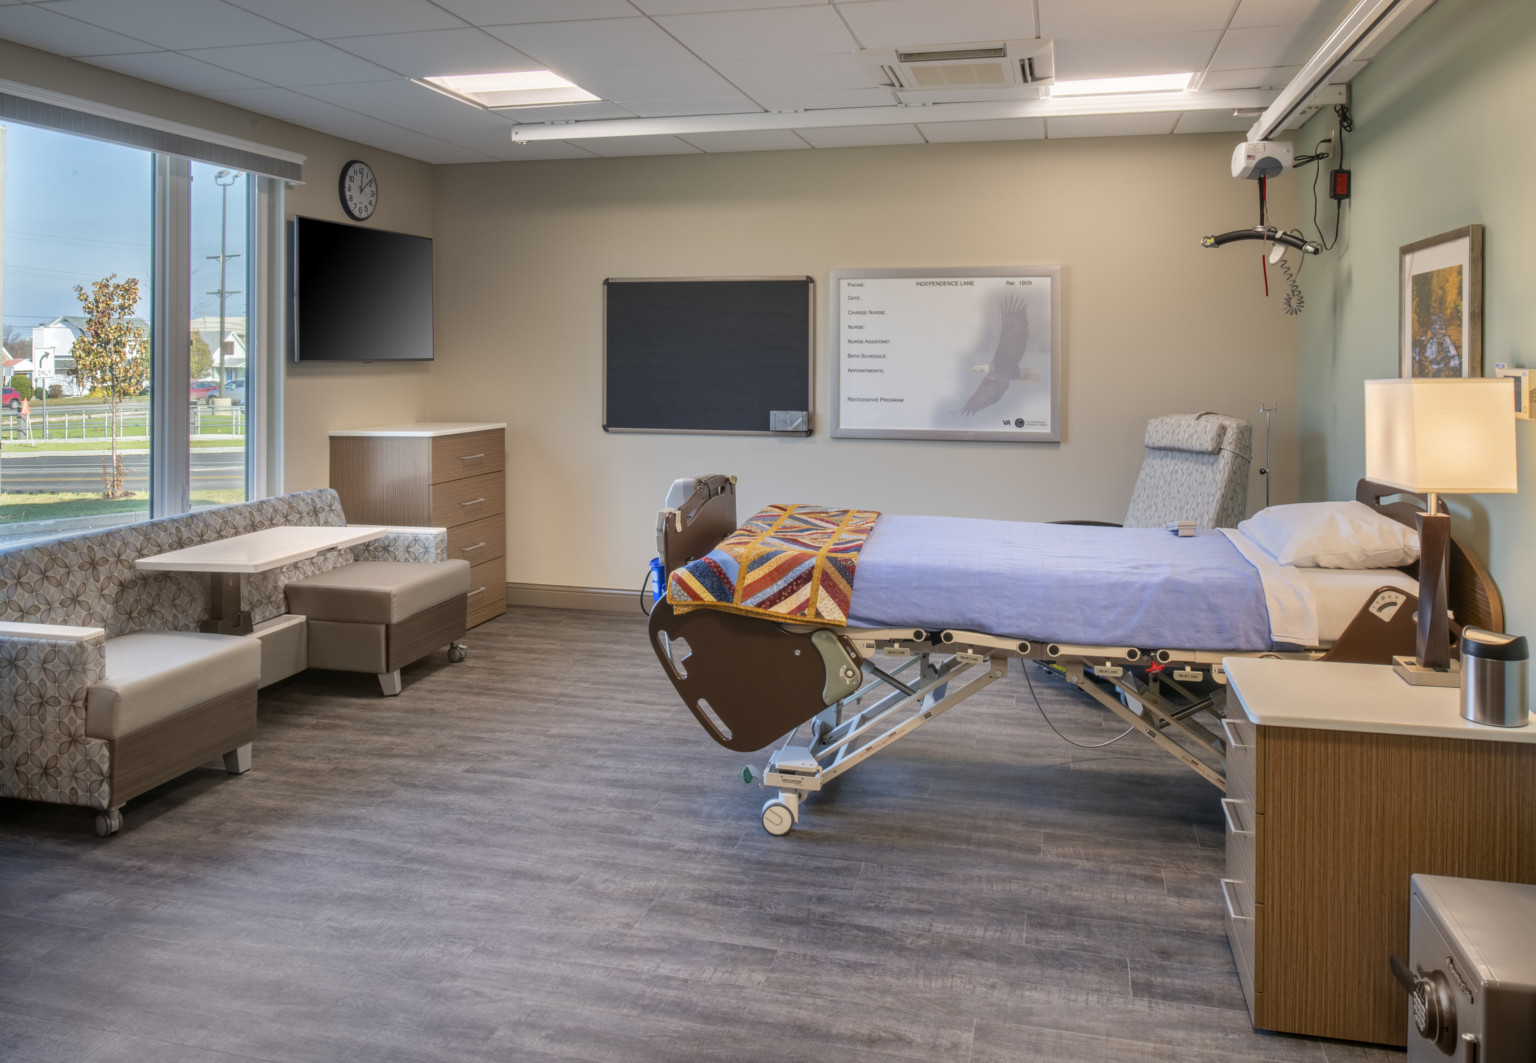 hospital room with patient bed on wheels integrated track ceiling wood floor and neutral walls. exterior wall has tall window